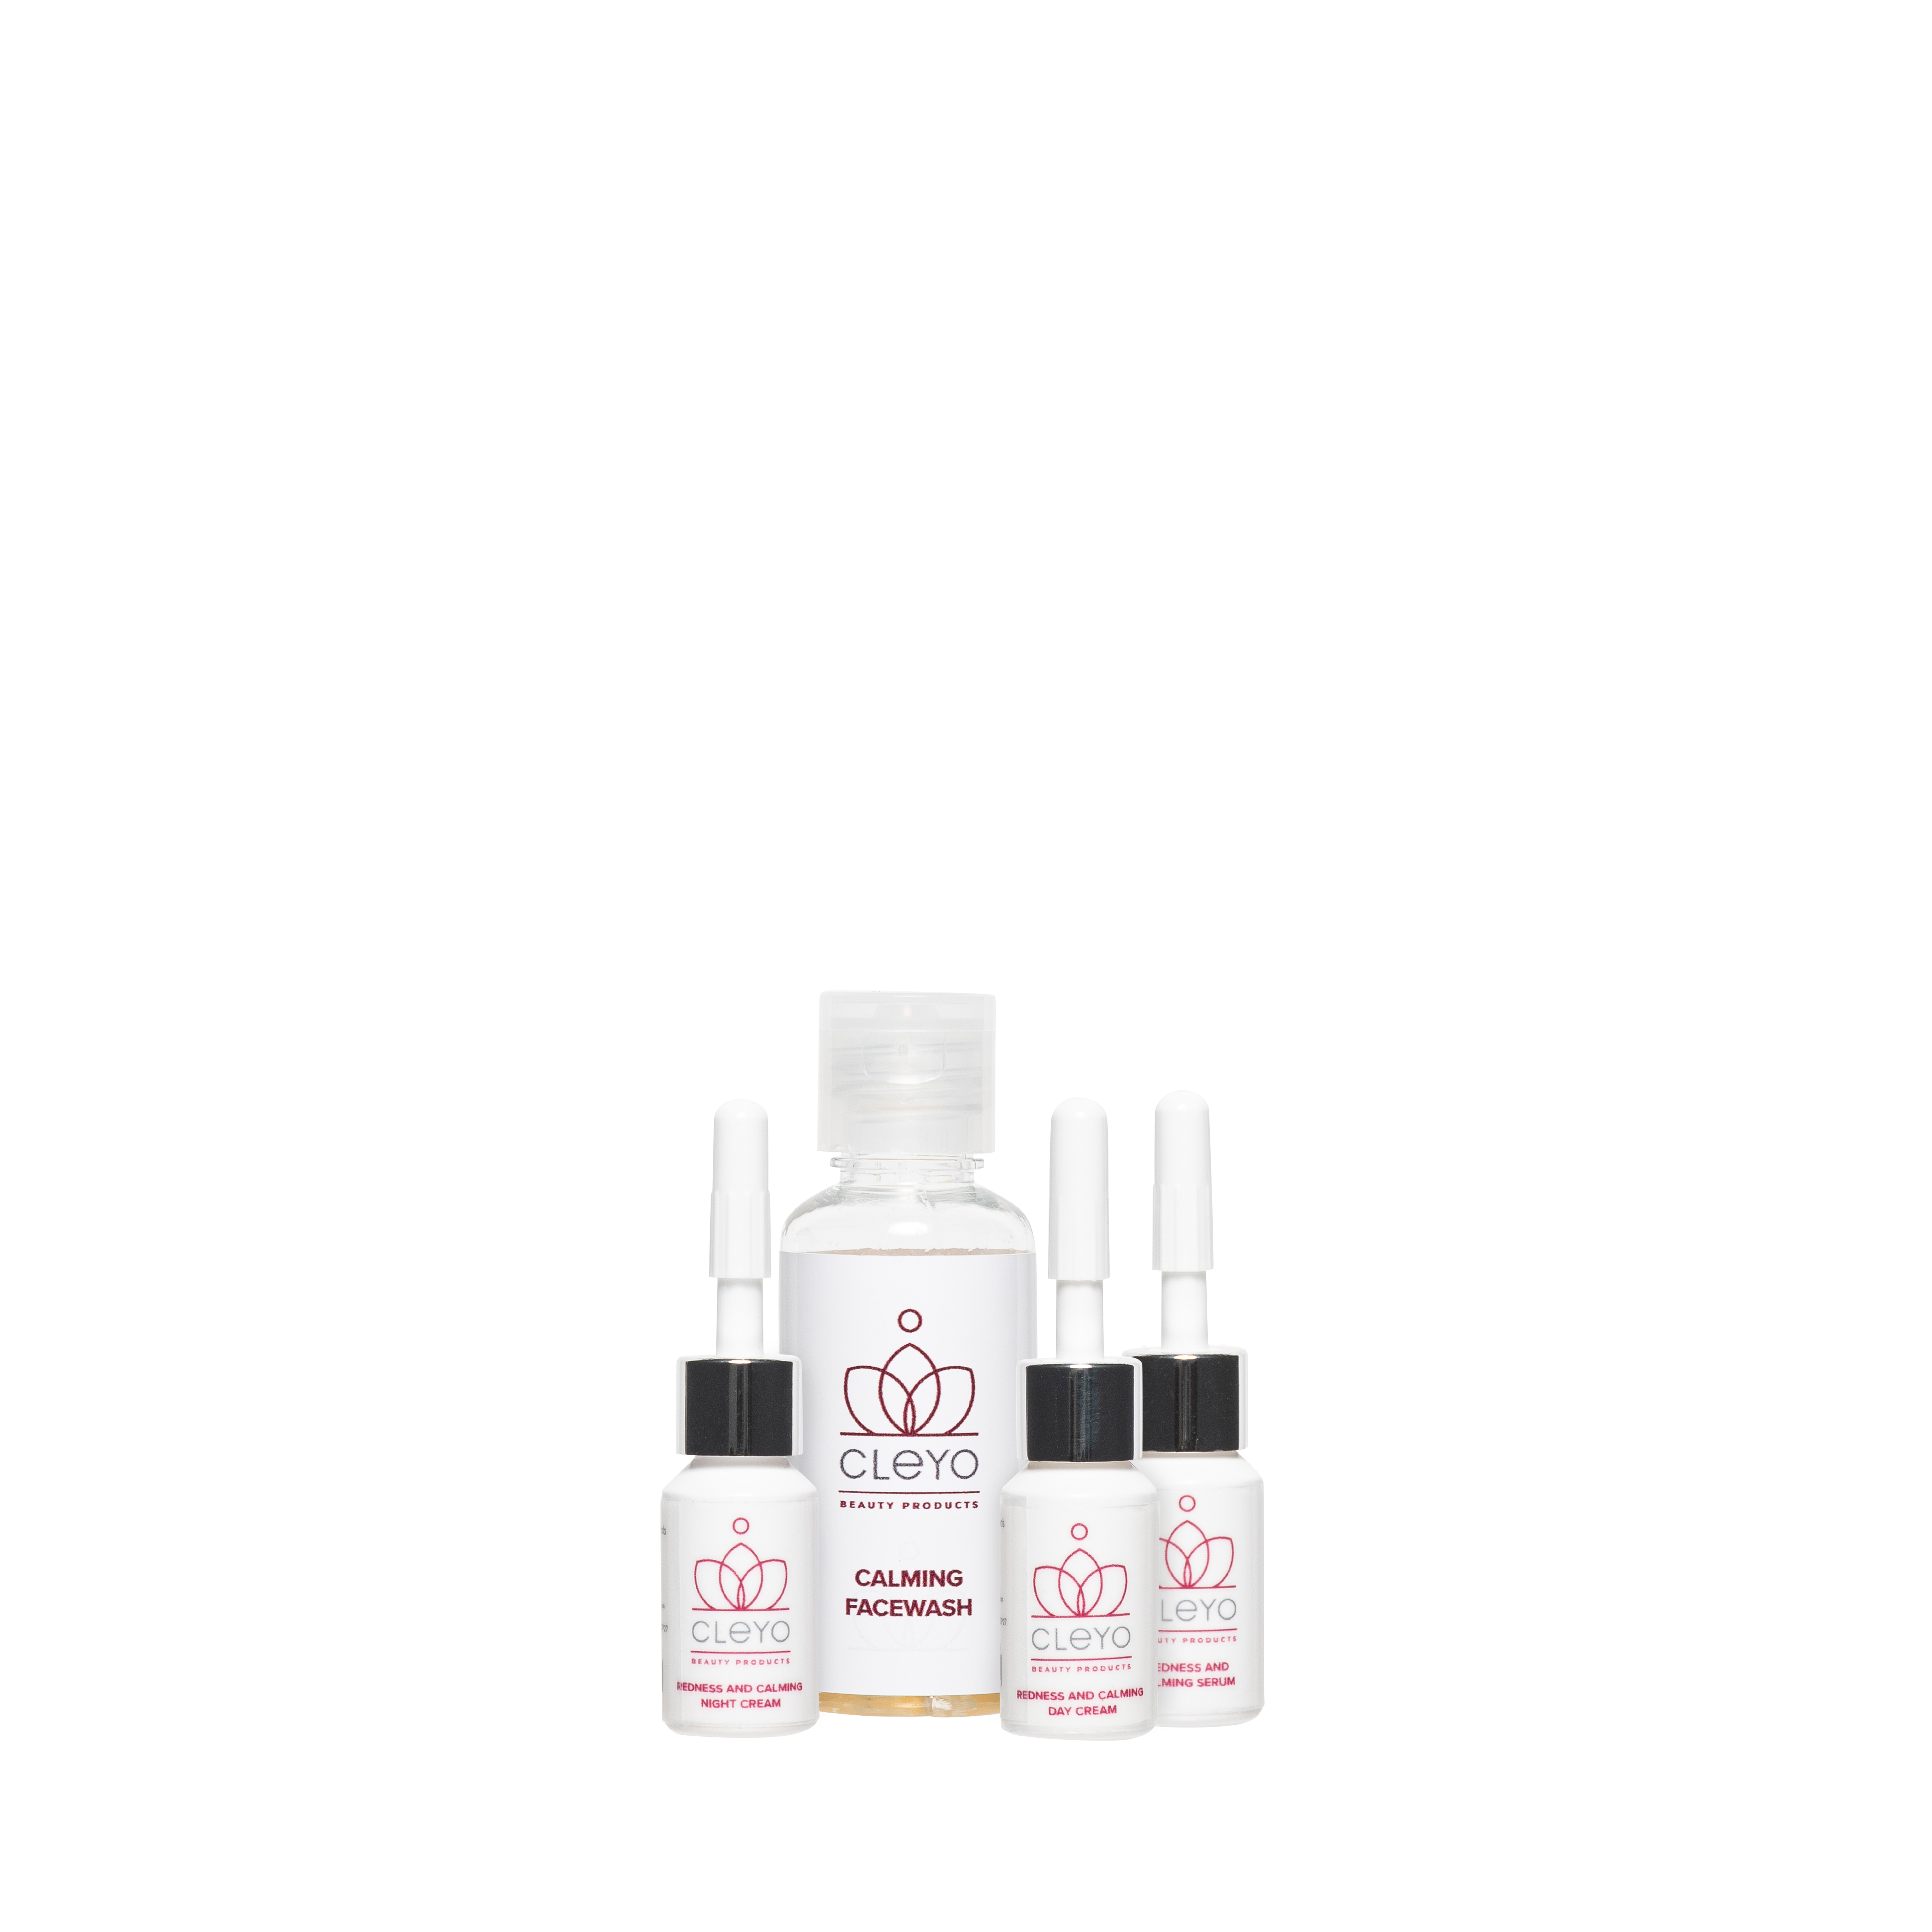 mini set Redness and Calming cleyo beauty products